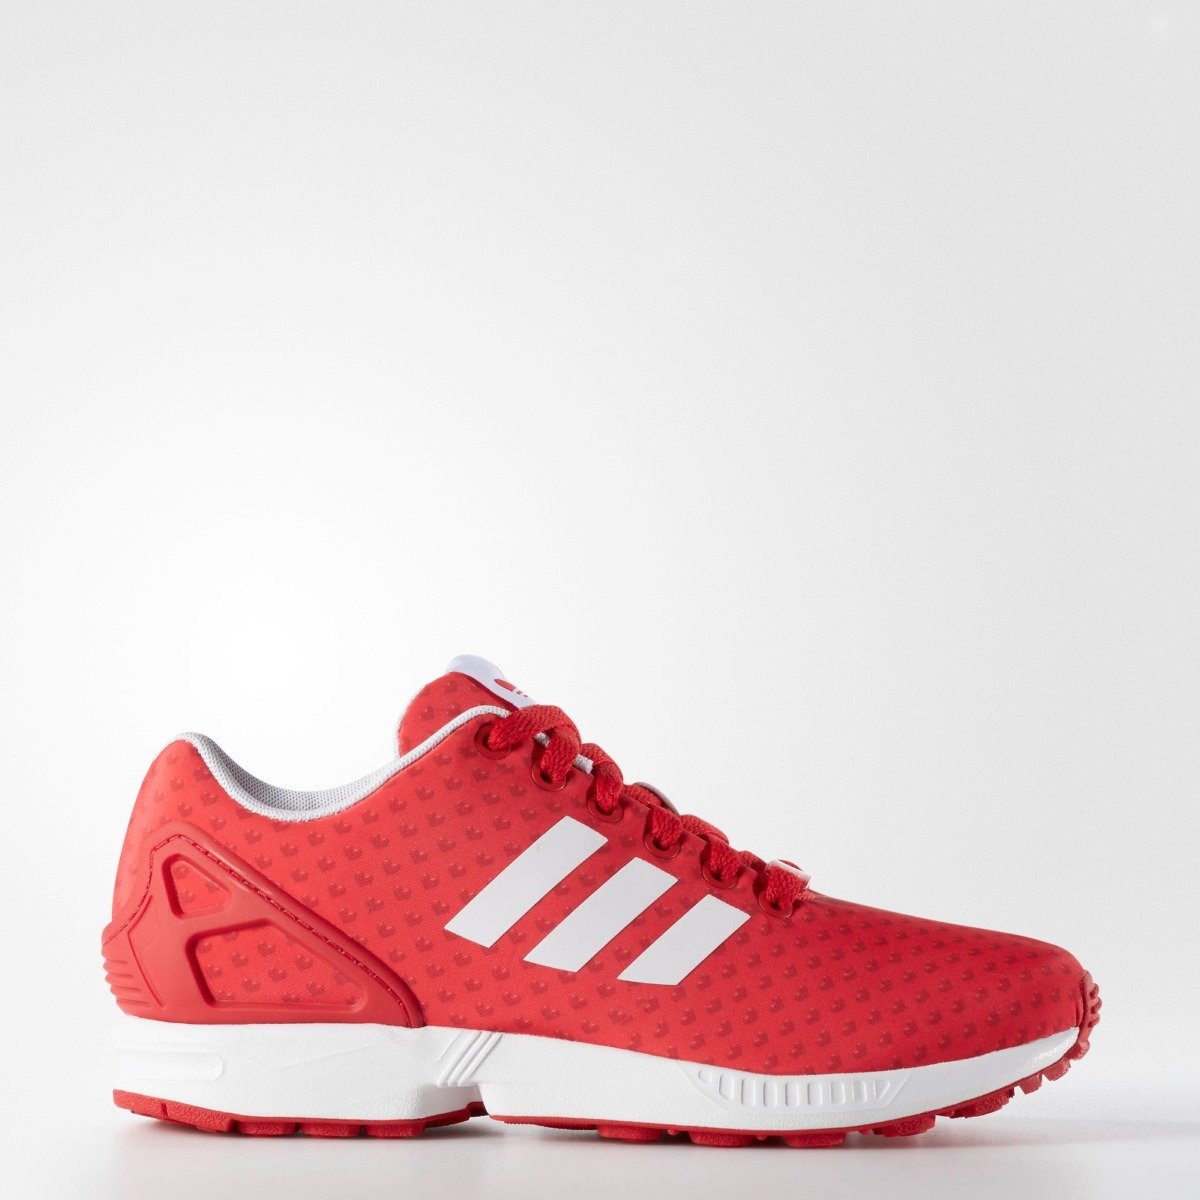 adidas zx flux red womens